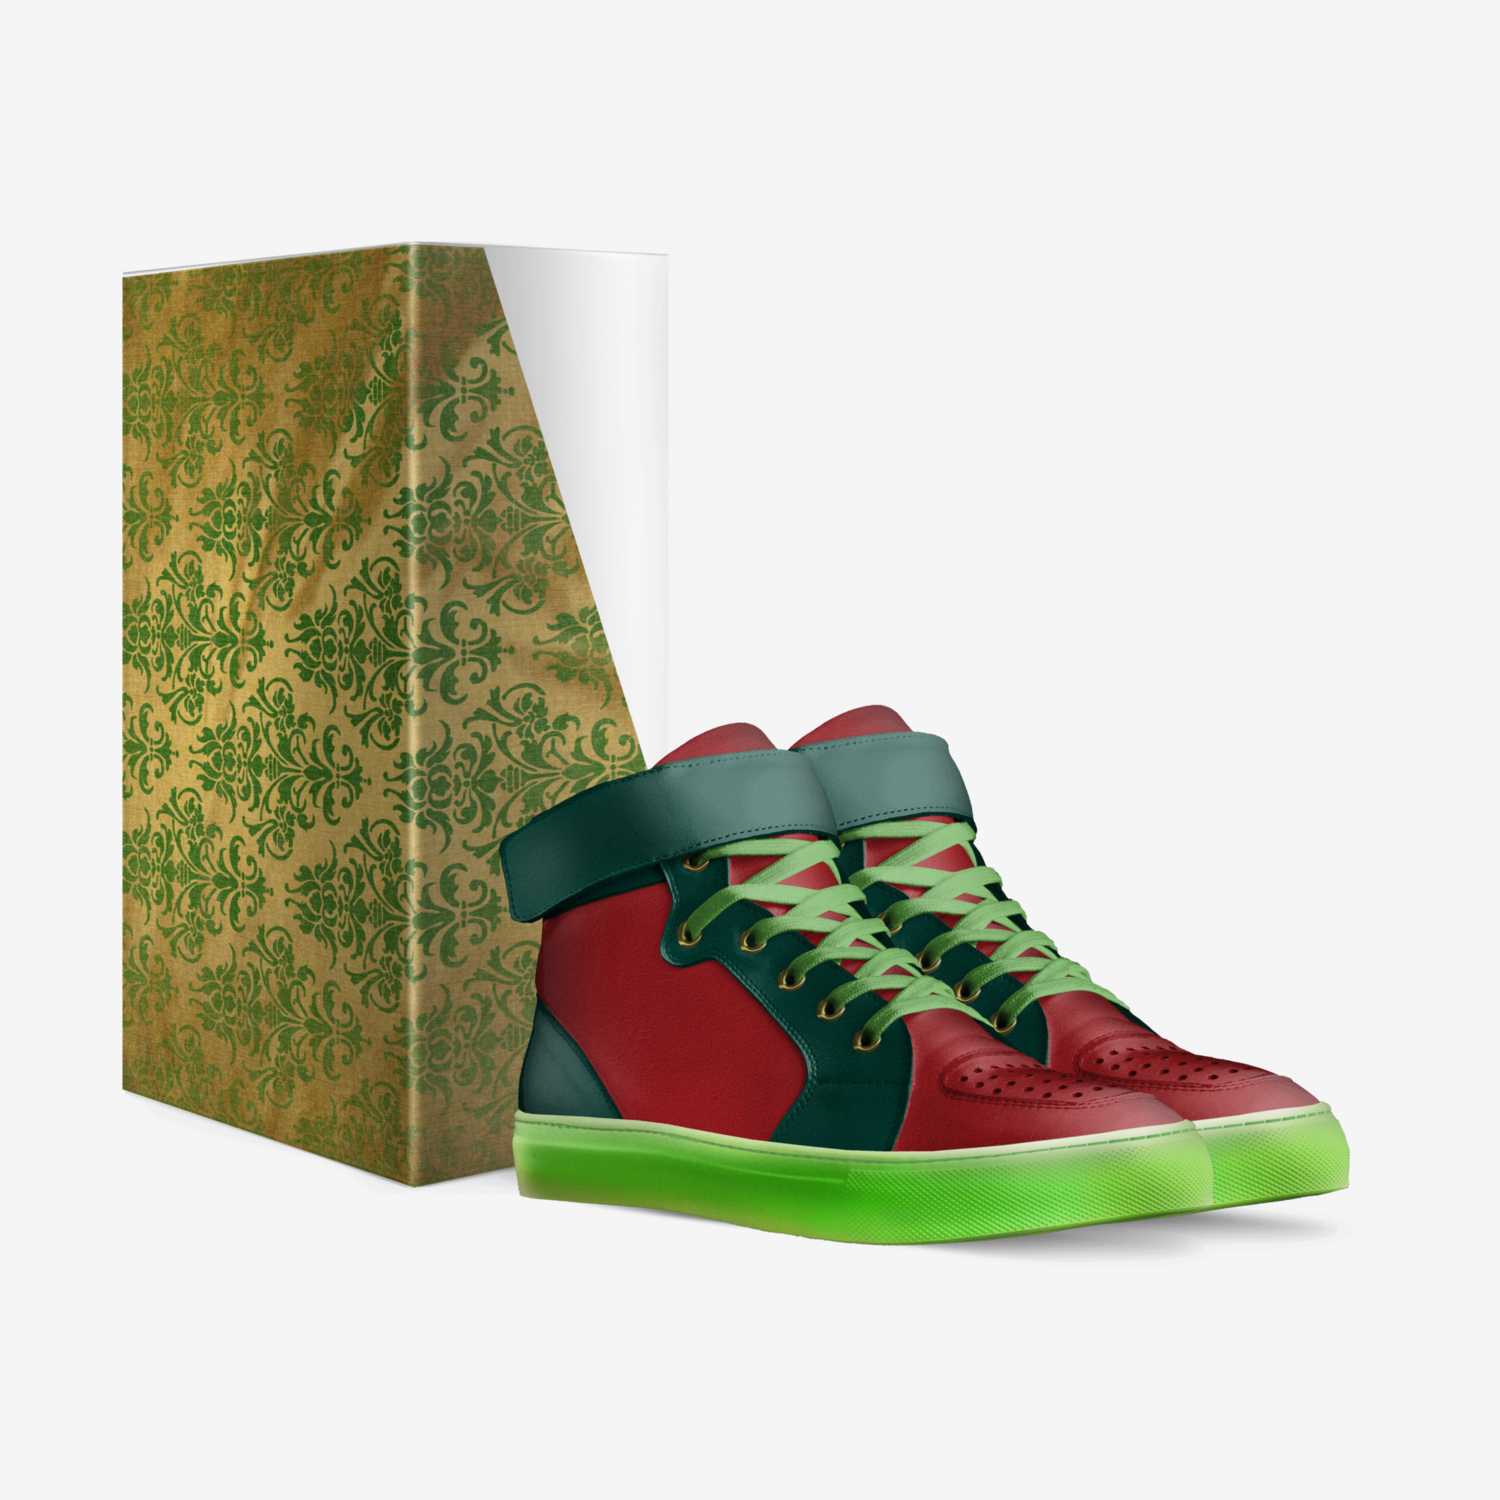 grinch custom made in Italy shoes by Jabin Mcgowan | Box view